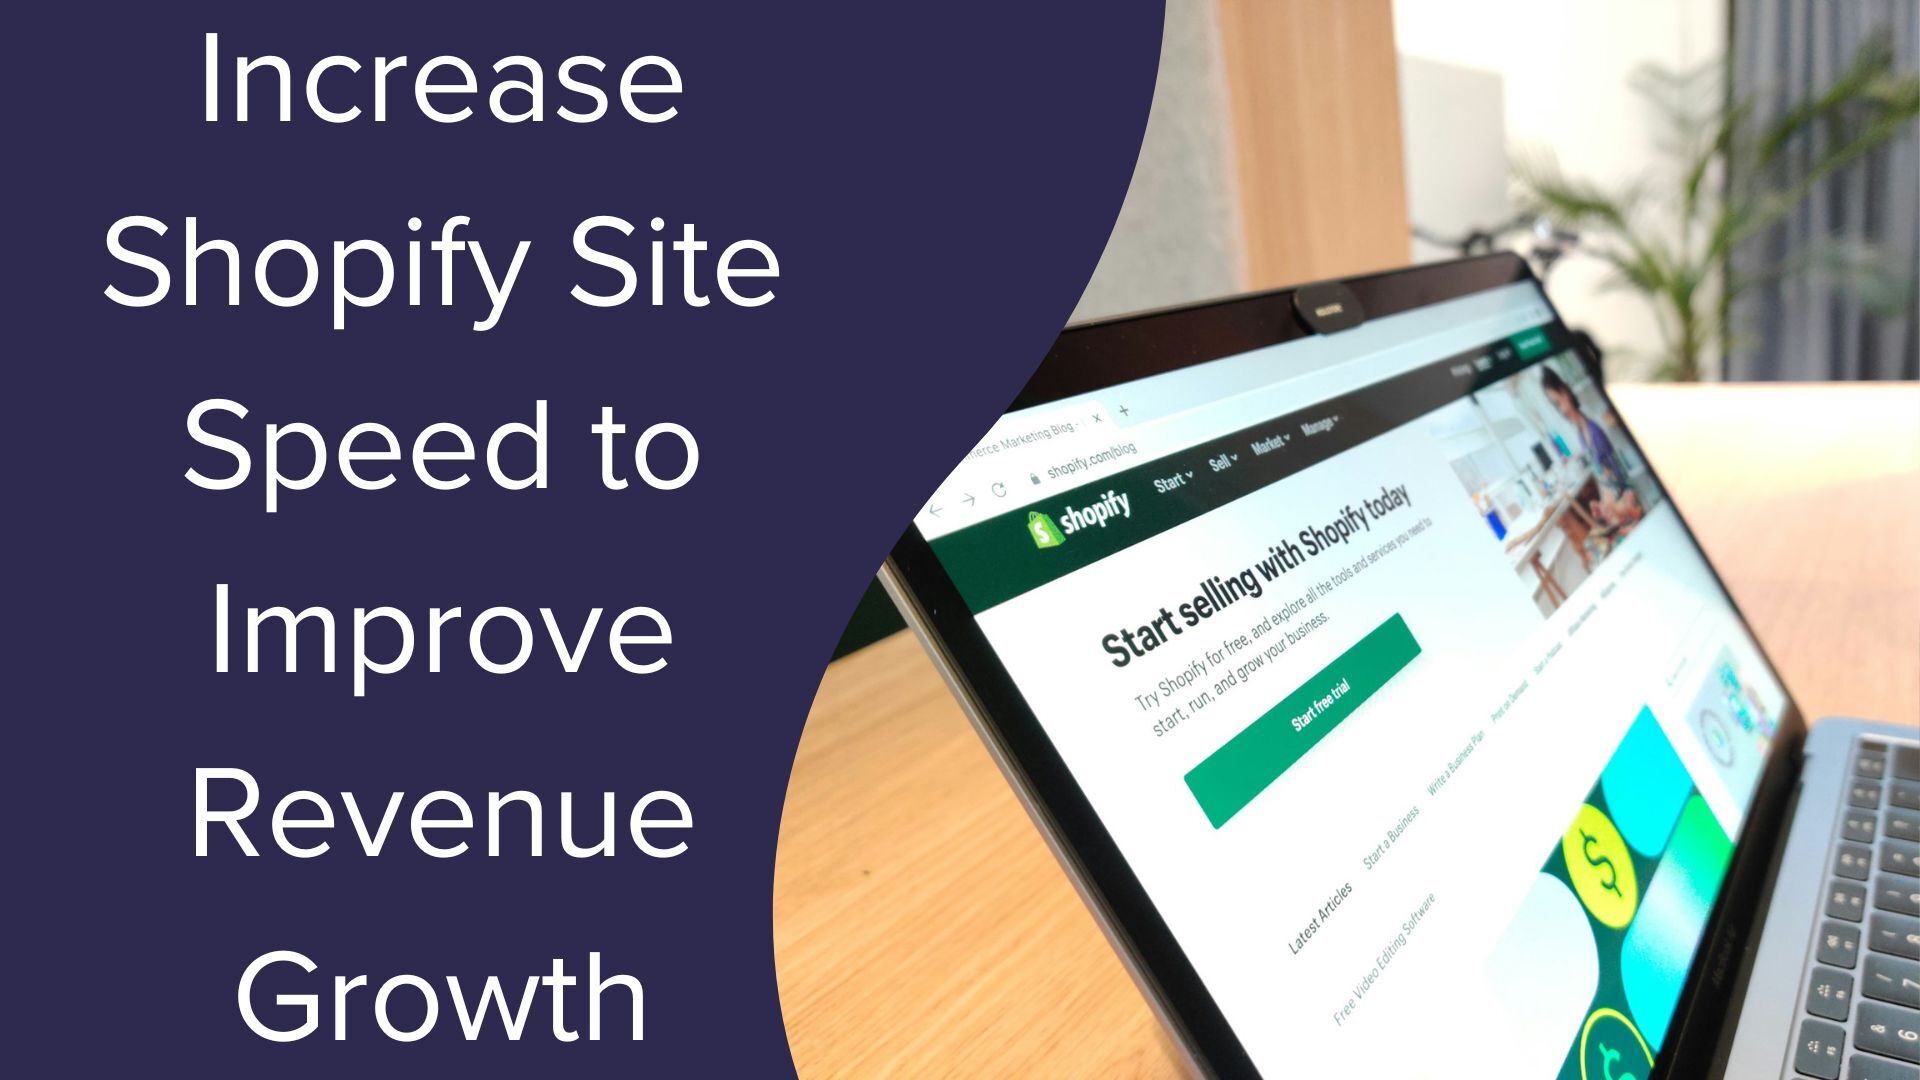 Increase Shopify Site Speed to Improve Revenue Growth